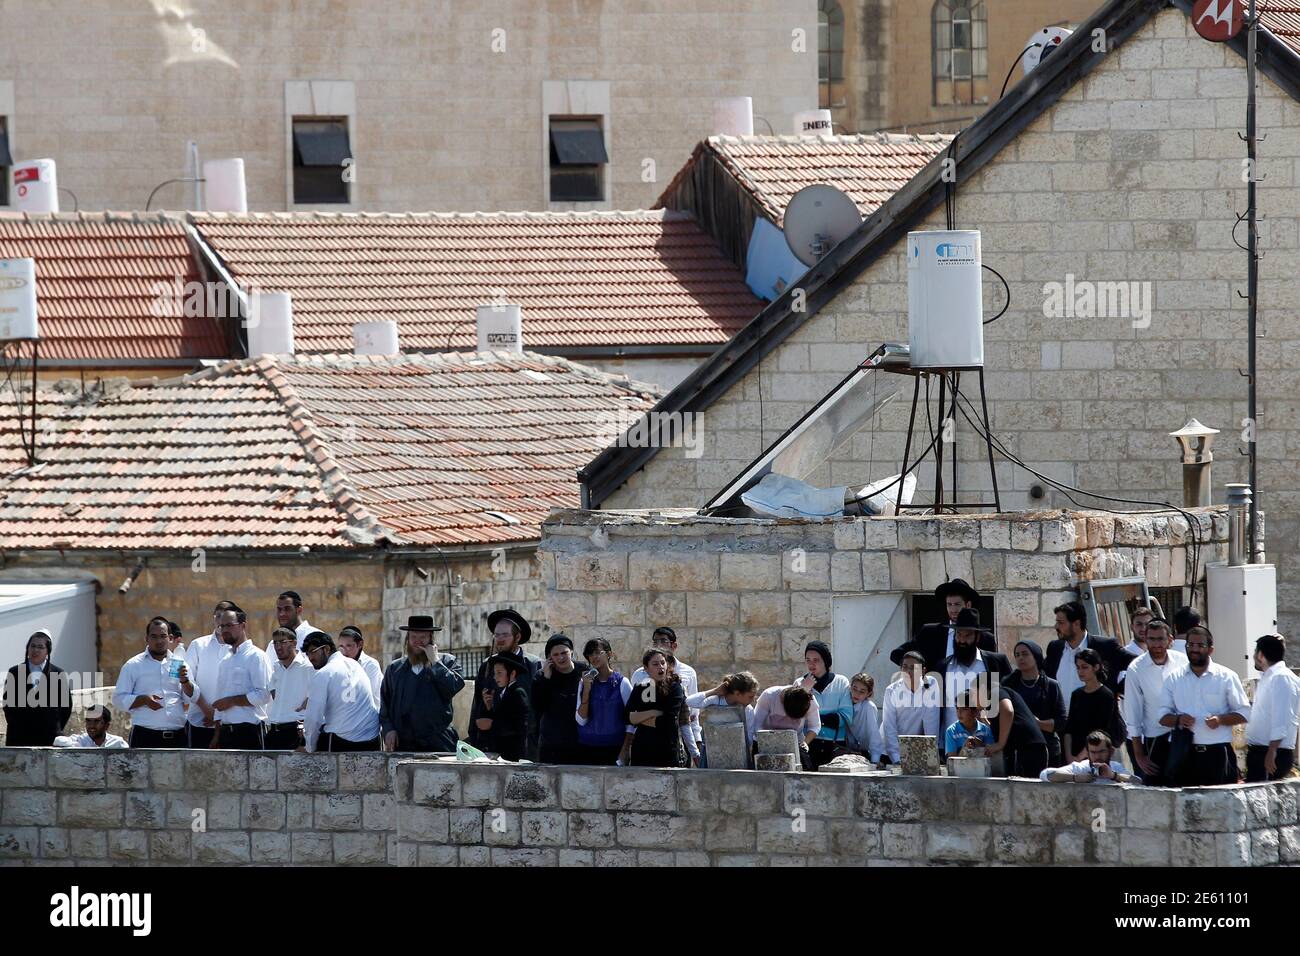 Residents stand on a roof as they observe the scene of a suspected attack in Jerusalem August 4, 2014. A Palestinian used his heavy construction vehicle to run down and kill an Israeli and overturn a bus on a main Jerusalem street on Monday in attacks that ended when policemen shot him dead, police said. REUTERS/Siegfried Modola (JERUSALEM - Tags: POLITICS CIVIL UNREST) Stock Photo